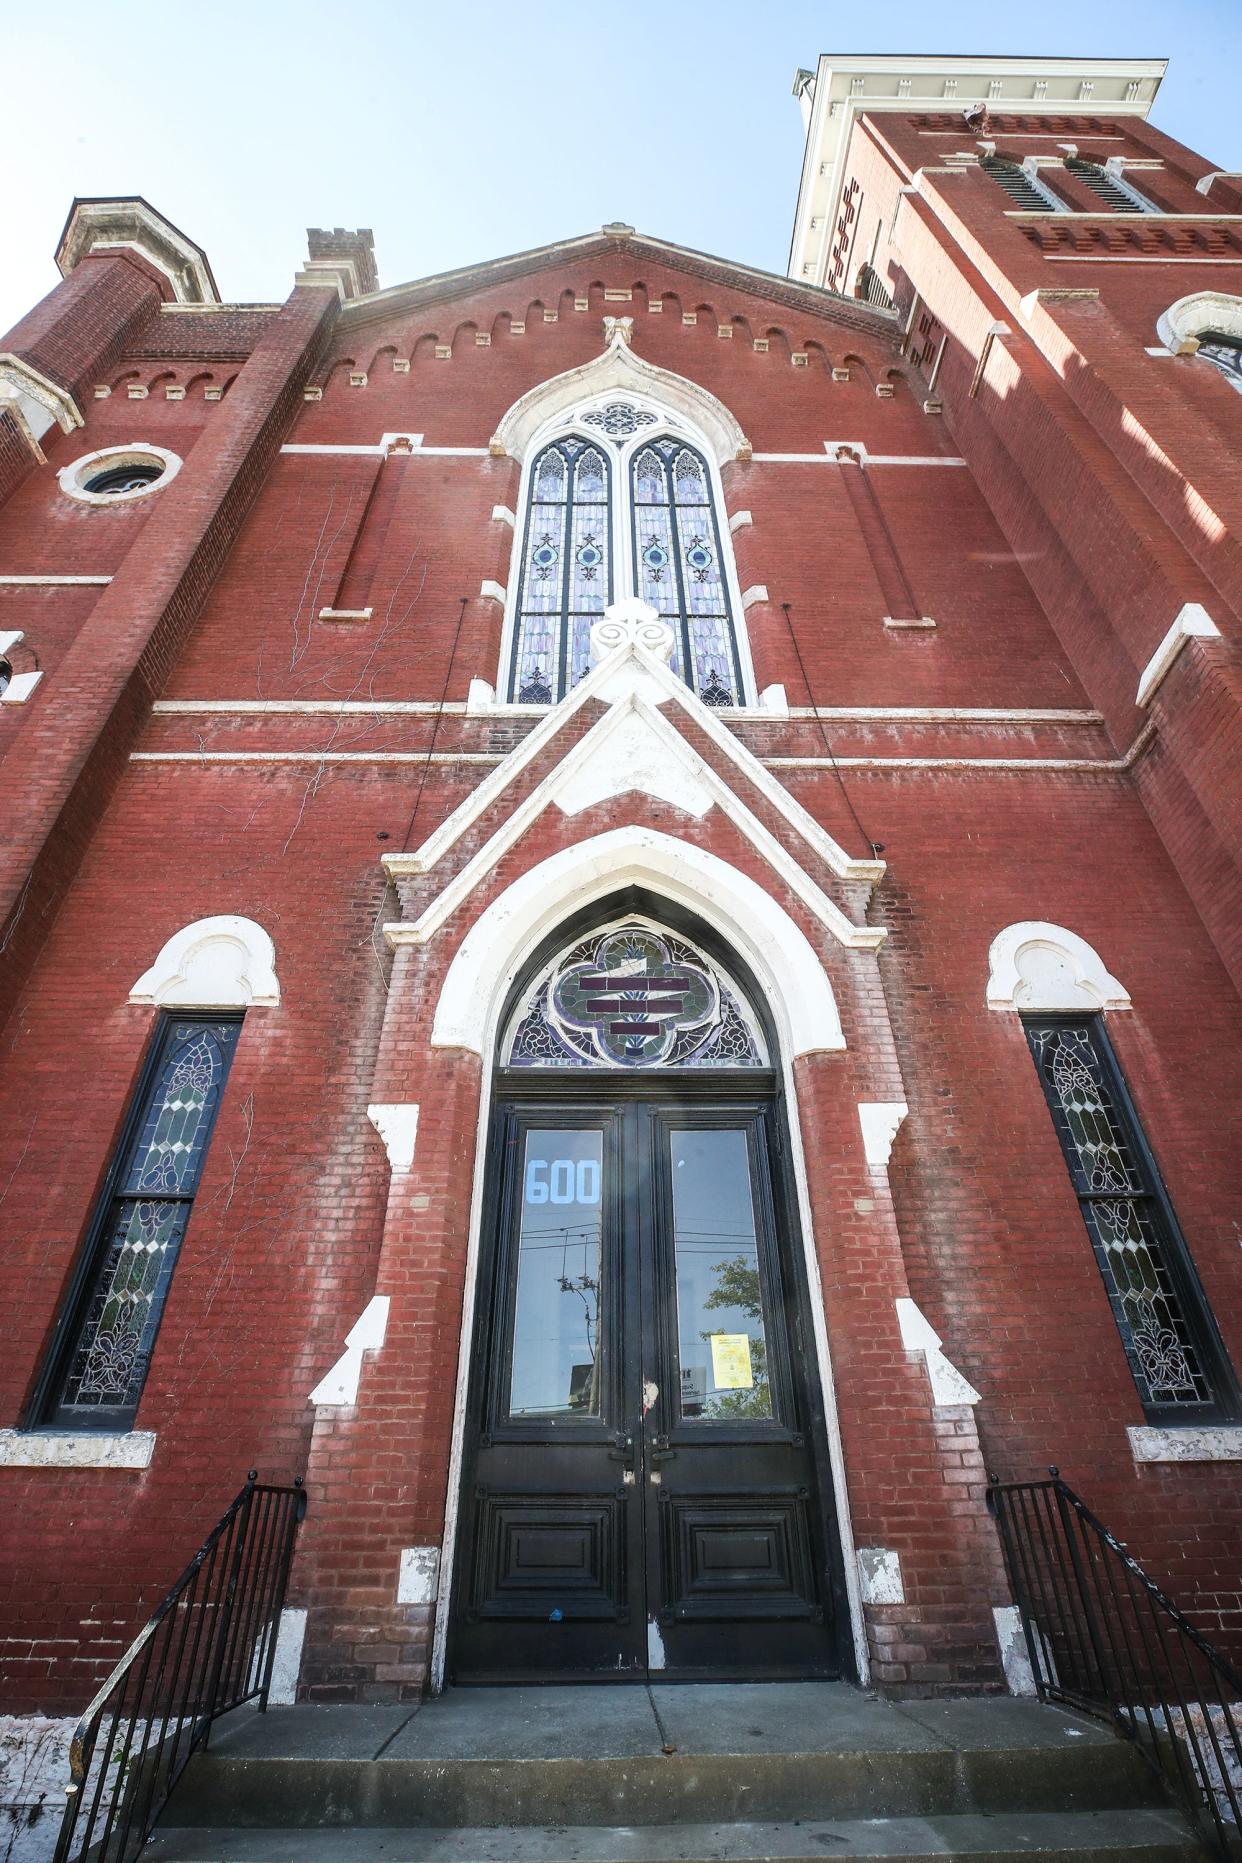 The former Market Street United Methodist Church at 600 E. Market Street is set to become home to a brand center for Heaven's Door Spirits.